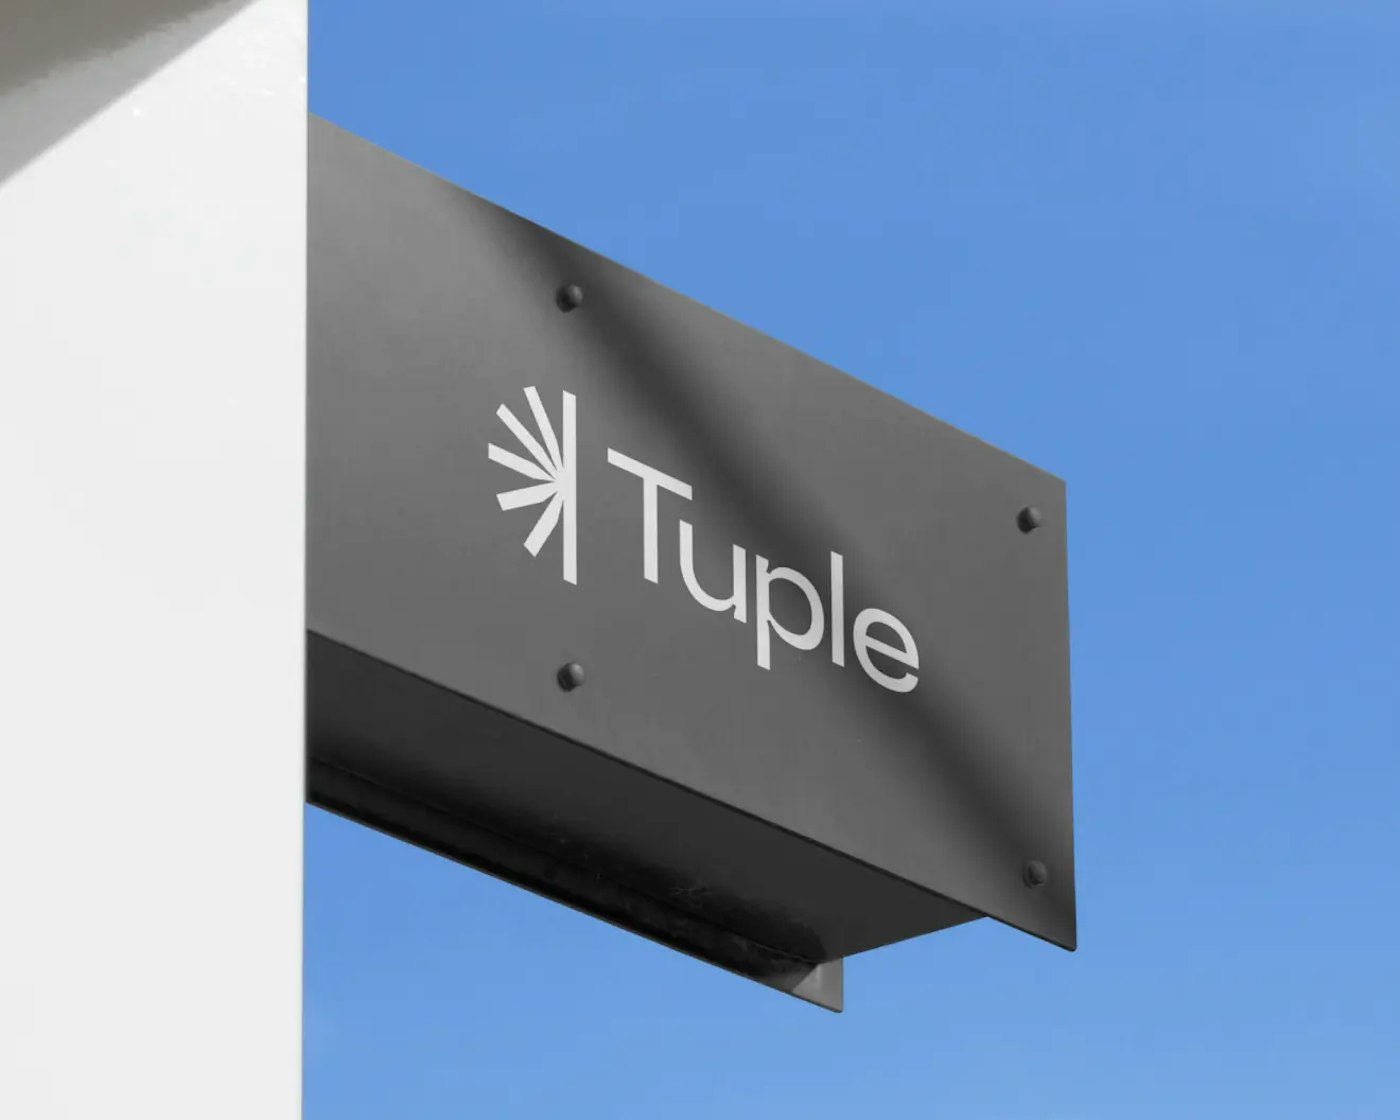 Image of a dark signboard with the new Tuple logo on it